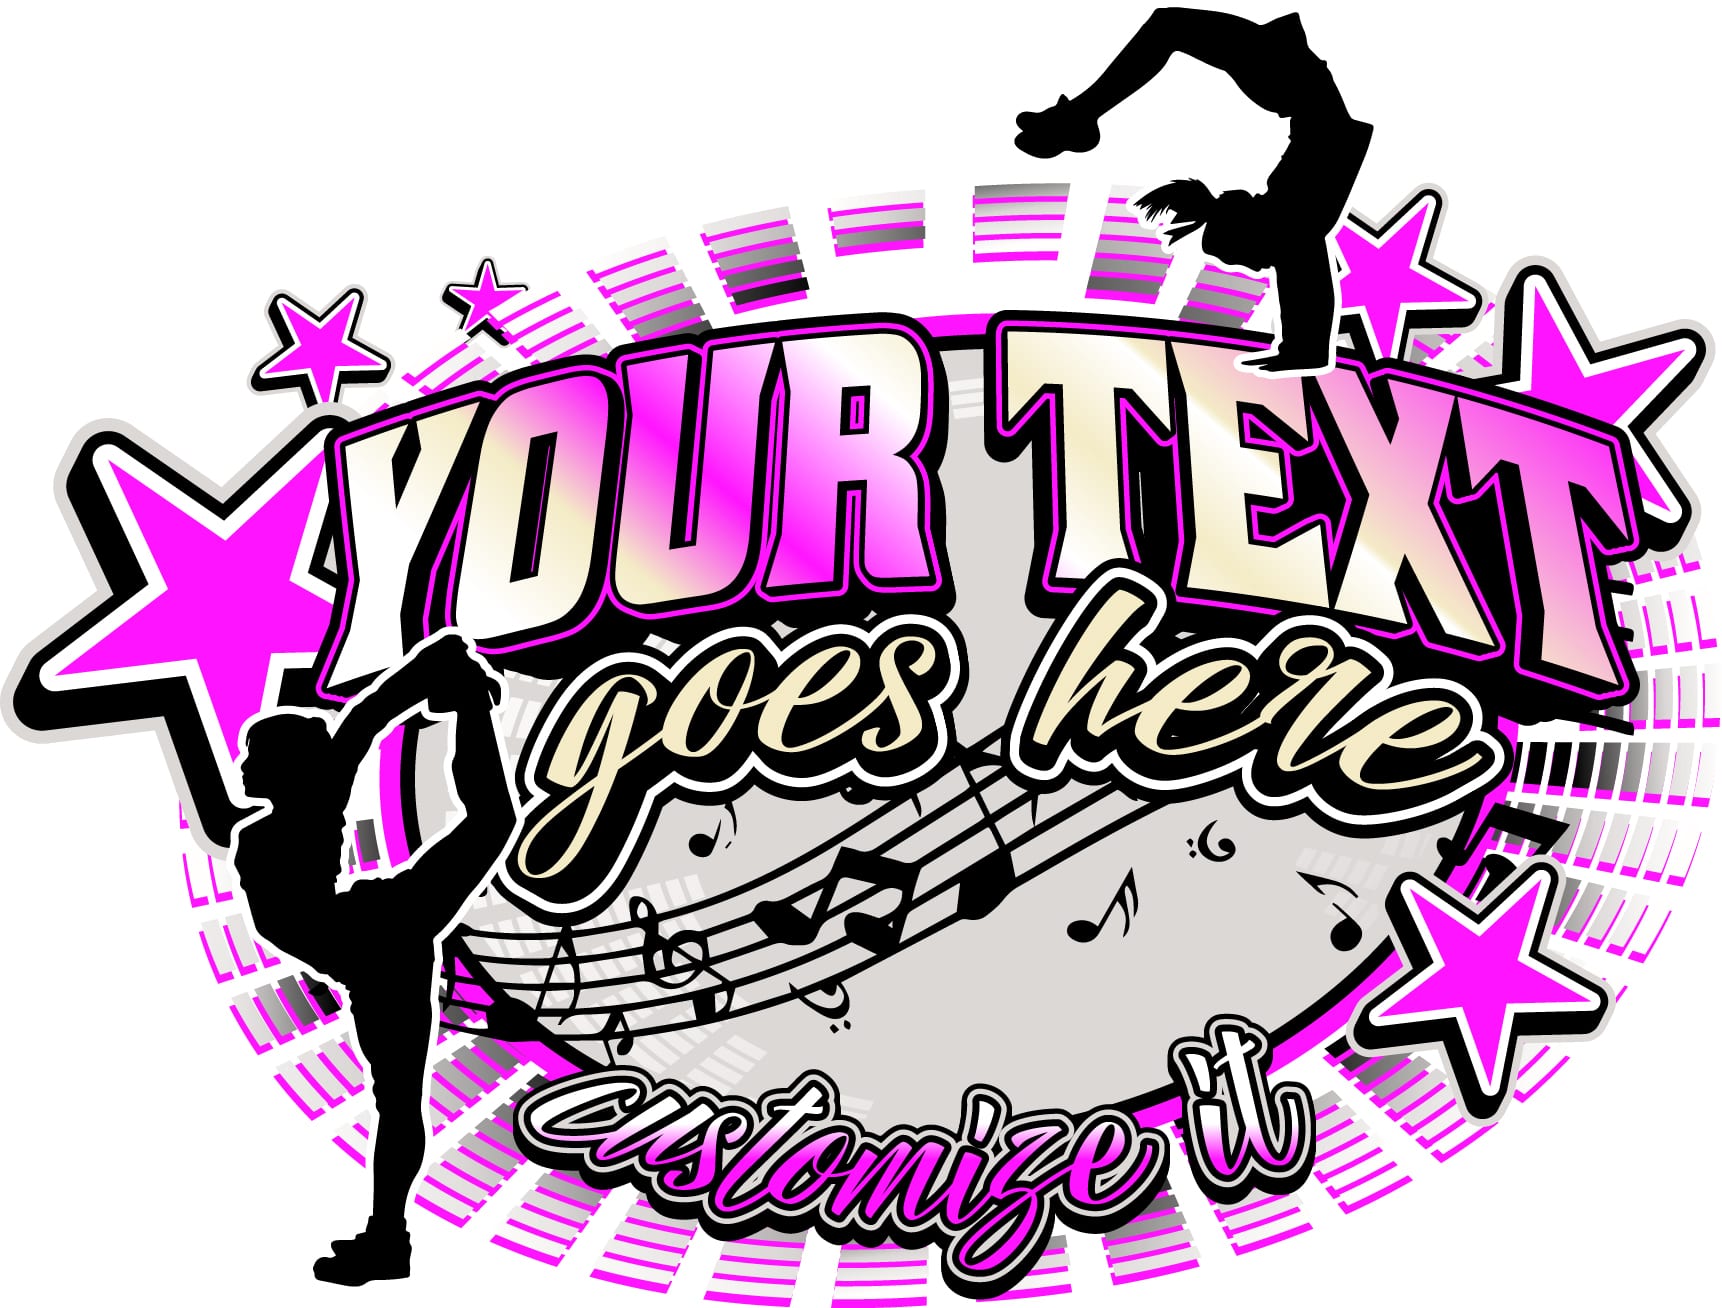 CHEER AND DANCE tshirt logo design with adjustable text and all